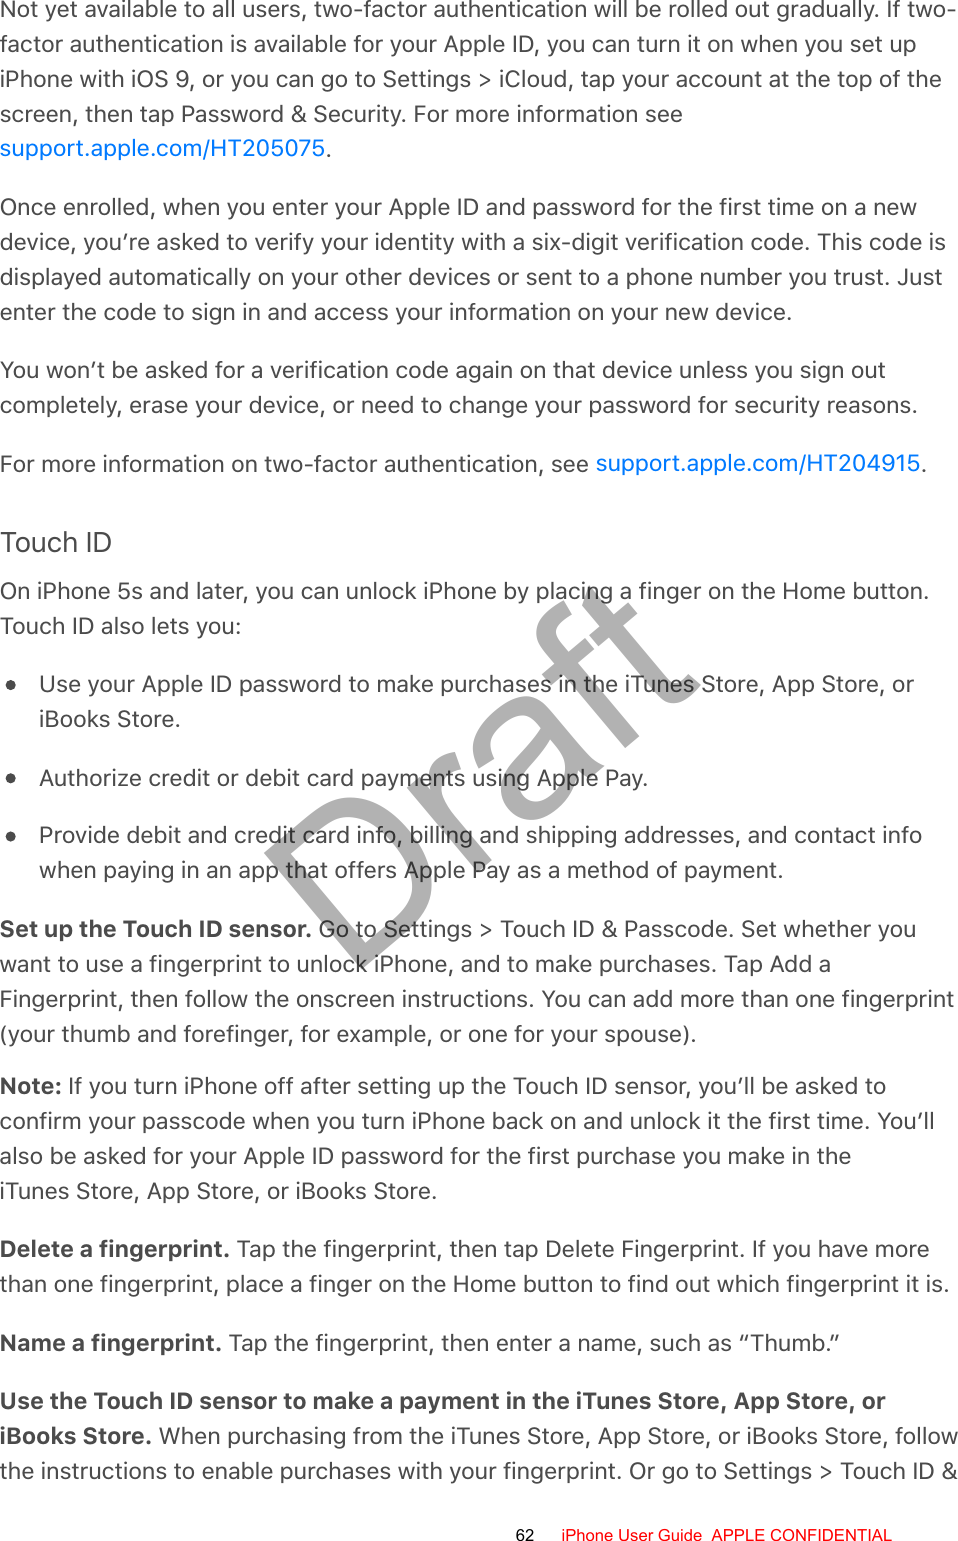 Not yet available to all users, two-factor authentication will be rolled out gradually. If two-factor authentication is available for your Apple ID, you can turn it on when you set upiPhone with iOS 9, or you can go to Settings &gt; iCloud, tap your account at the top of thescreen, then tap Password &amp; Security. For more information see.Once enrolled, when you enter your Apple ID and password for the first time on a newdevice, you’re asked to verify your identity with a six-digit verification code. This code isdisplayed automatically on your other devices or sent to a phone number you trust. Justenter the code to sign in and access your information on your new device.You won’t be asked for a verification code again on that device unless you sign outcompletely, erase your device, or need to change your password for security reasons.For more information on two-factor authentication, see  .Touch IDOn iPhone 5s and later, you can unlock iPhone by placing a finger on the Home button.Touch ID also lets you:Use your Apple ID password to make purchases in the iTunes Store, App Store, oriBooks Store.Authorize credit or debit card payments using Apple Pay.Provide debit and credit card info, billing and shipping addresses, and contact infowhen paying in an app that offers Apple Pay as a method of payment.Set up the Touch ID sensor. Go to Settings &gt; Touch ID &amp; Passcode. Set whether youwant to use a fingerprint to unlock iPhone, and to make purchases. Tap Add aFingerprint, then follow the onscreen instructions. You can add more than one fingerprint(your thumb and forefinger, for example, or one for your spouse).Note: If you turn iPhone off after setting up the Touch ID sensor, you’ll be asked toconfirm your passcode when you turn iPhone back on and unlock it the first time. You’llalso be asked for your Apple ID password for the first purchase you make in theiTunes Store, App Store, or iBooks Store.Delete a fingerprint. Tap the fingerprint, then tap Delete Fingerprint. If you have morethan one fingerprint, place a finger on the Home button to find out which fingerprint it is.Name a fingerprint. Tap the fingerprint, then enter a name, such as “Thumb.”Use the Touch ID sensor to make a payment in the iTunes Store, App Store, oriBooks Store. When purchasing from the iTunes Store, App Store, or iBooks Store, followthe instructions to enable purchases with your fingerprint. Or go to Settings &gt; Touch ID &amp;support.apple.com/HT205075support.apple.com/HT20491562 iPhone User Guide  APPLE CONFIDENTIALDraft